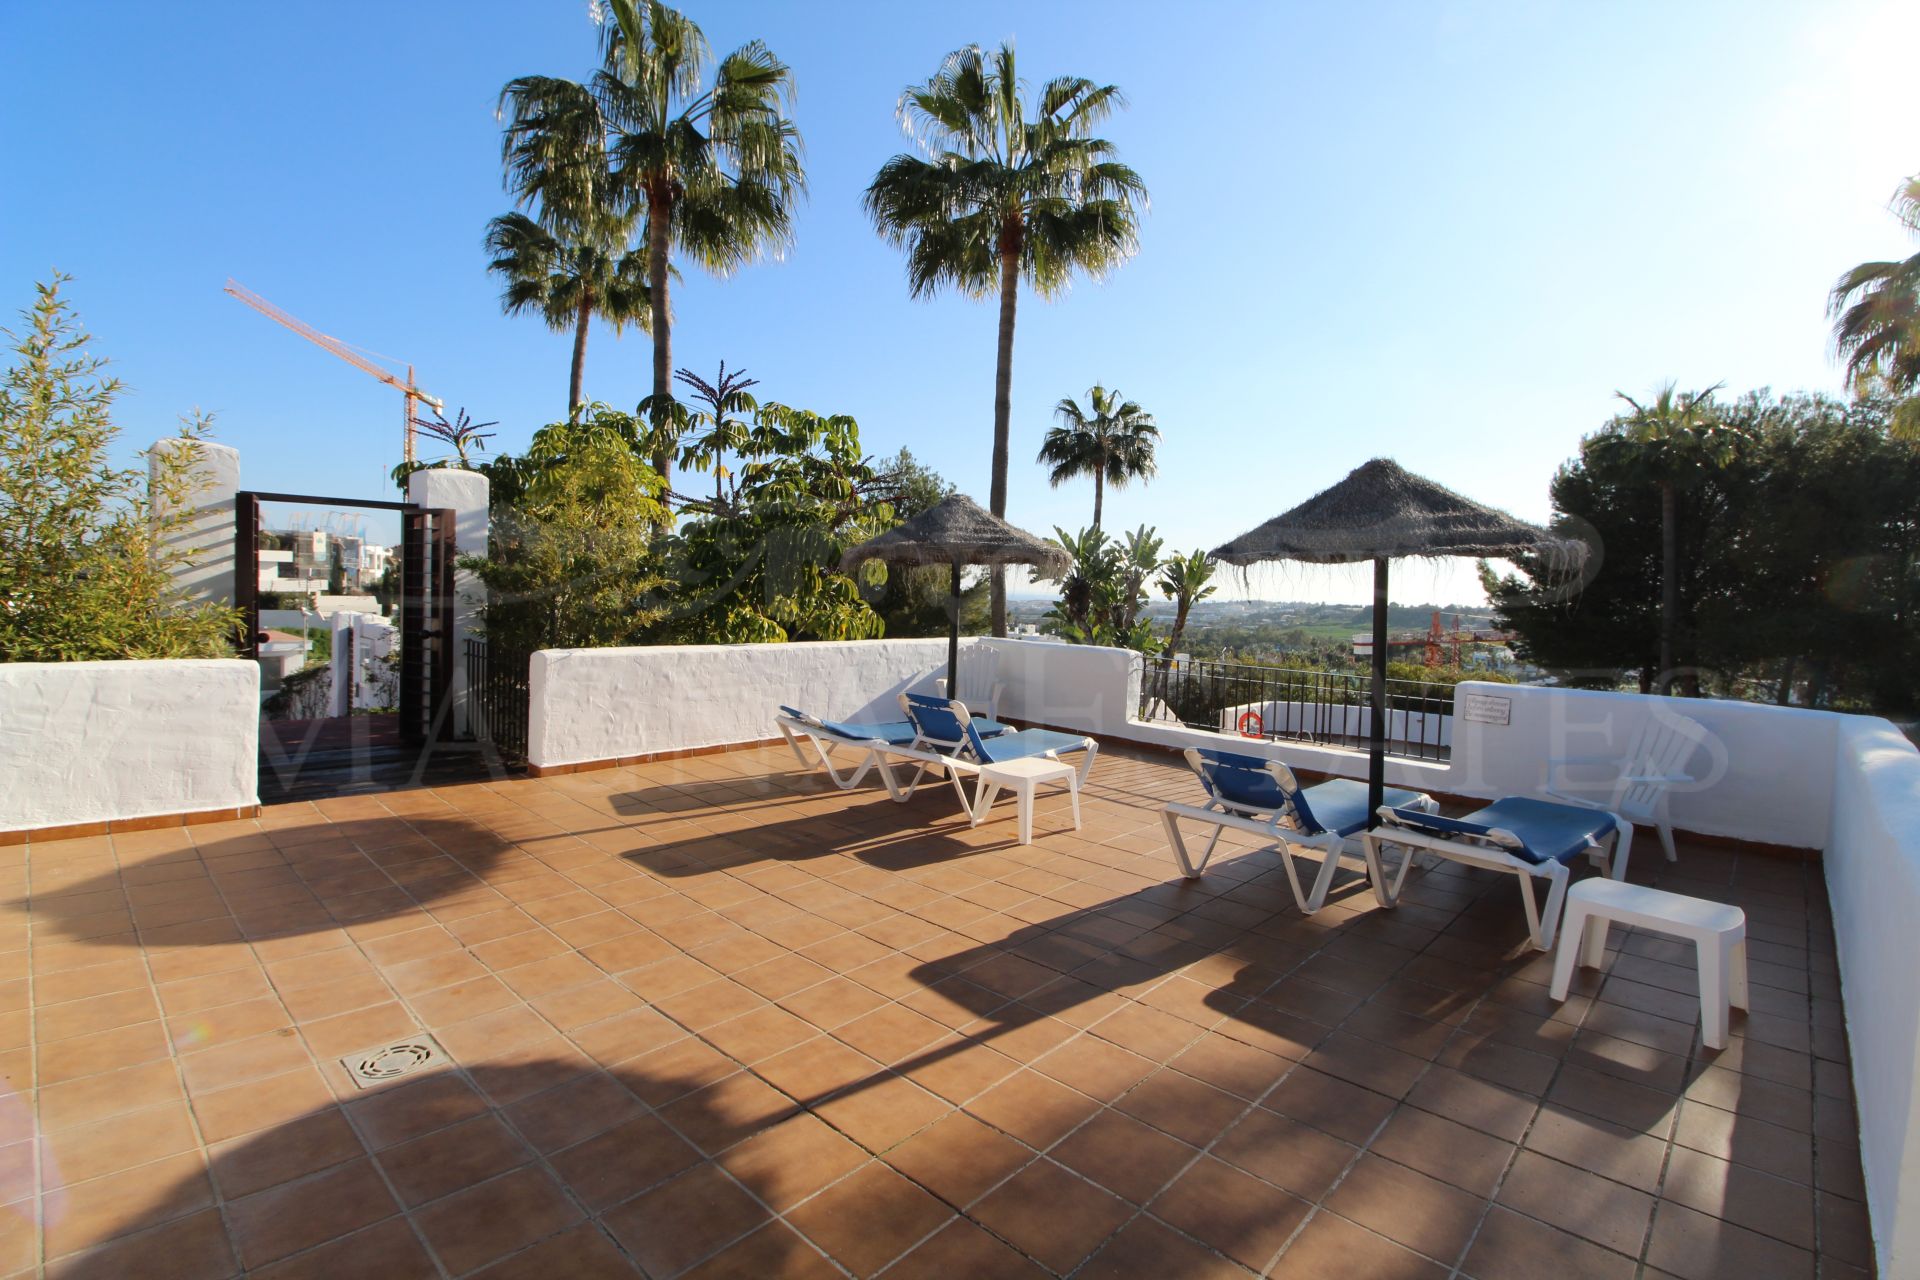 Fully renovated duplex penthouse with sea views in Nueva Andalucía, Marbella